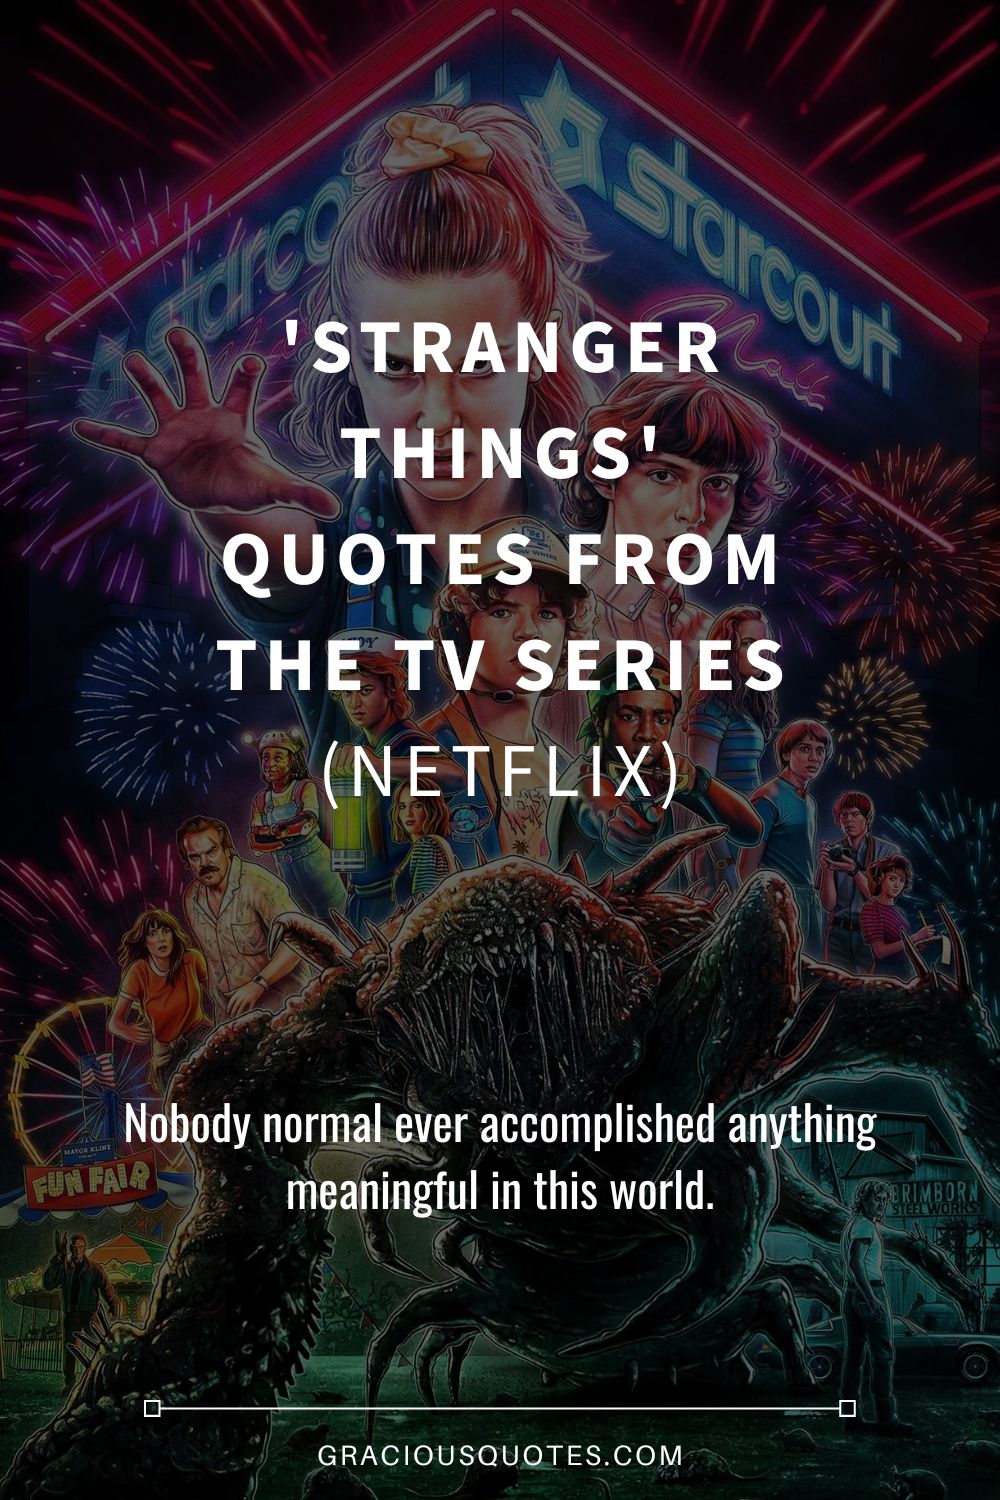 'Stranger Things' Quotes from the TV Series (NETFLIX) - Gracious Quotes